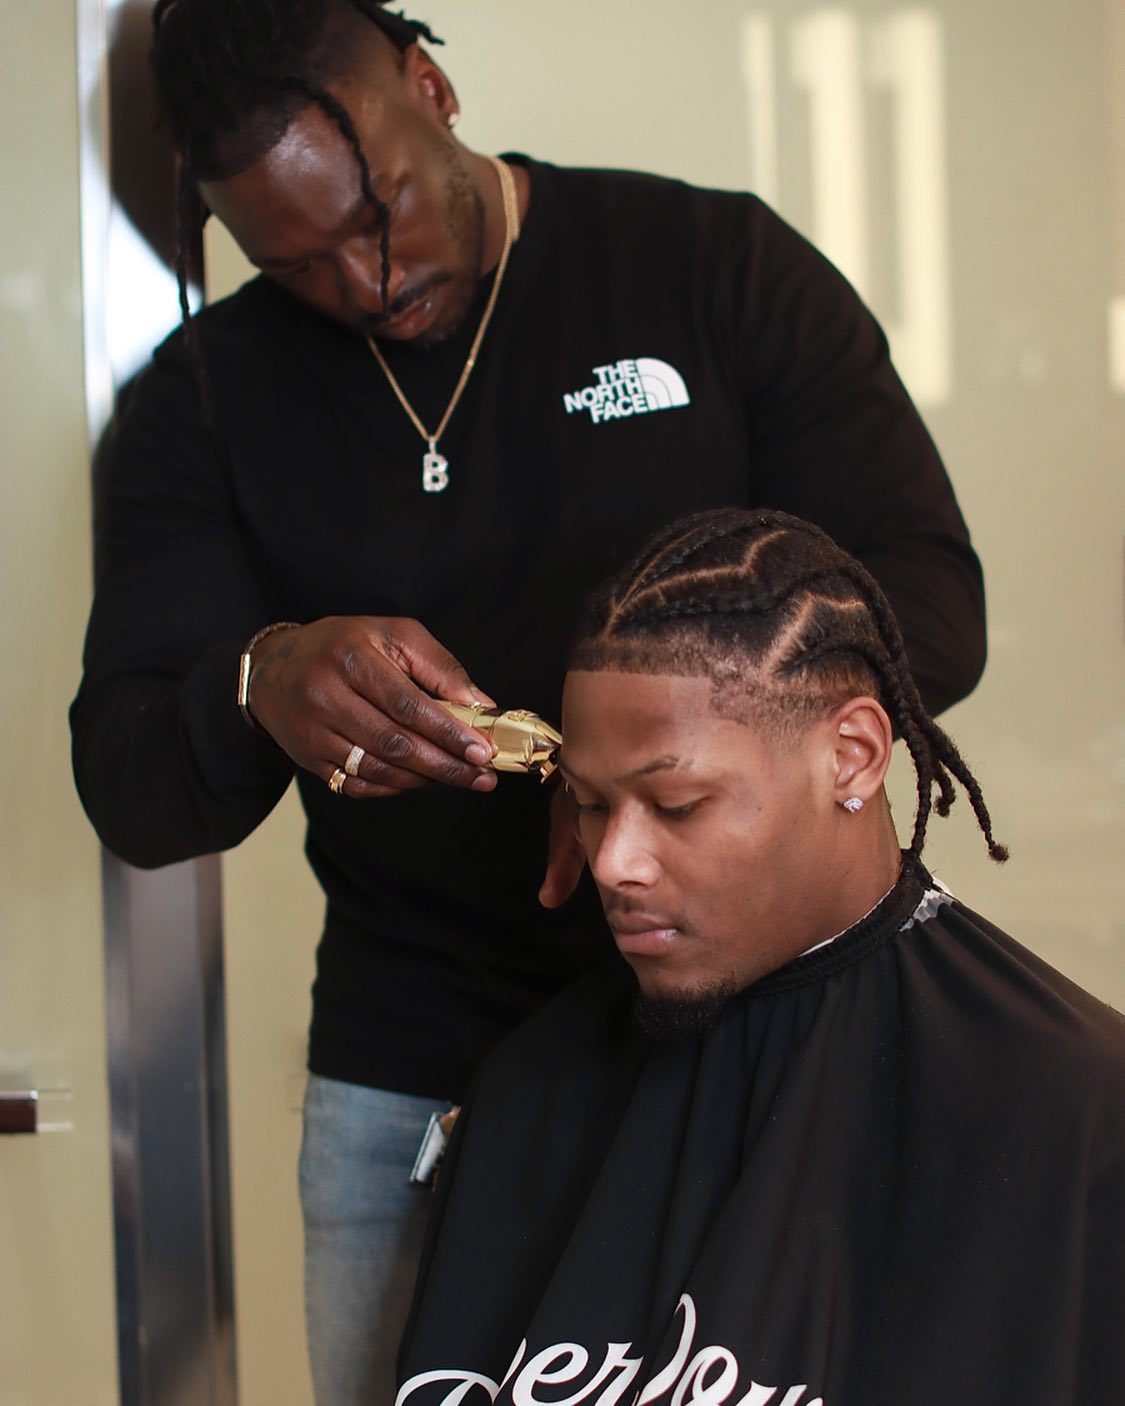 A barber, focused and using clippers, is meticulously shaping another man's hair.